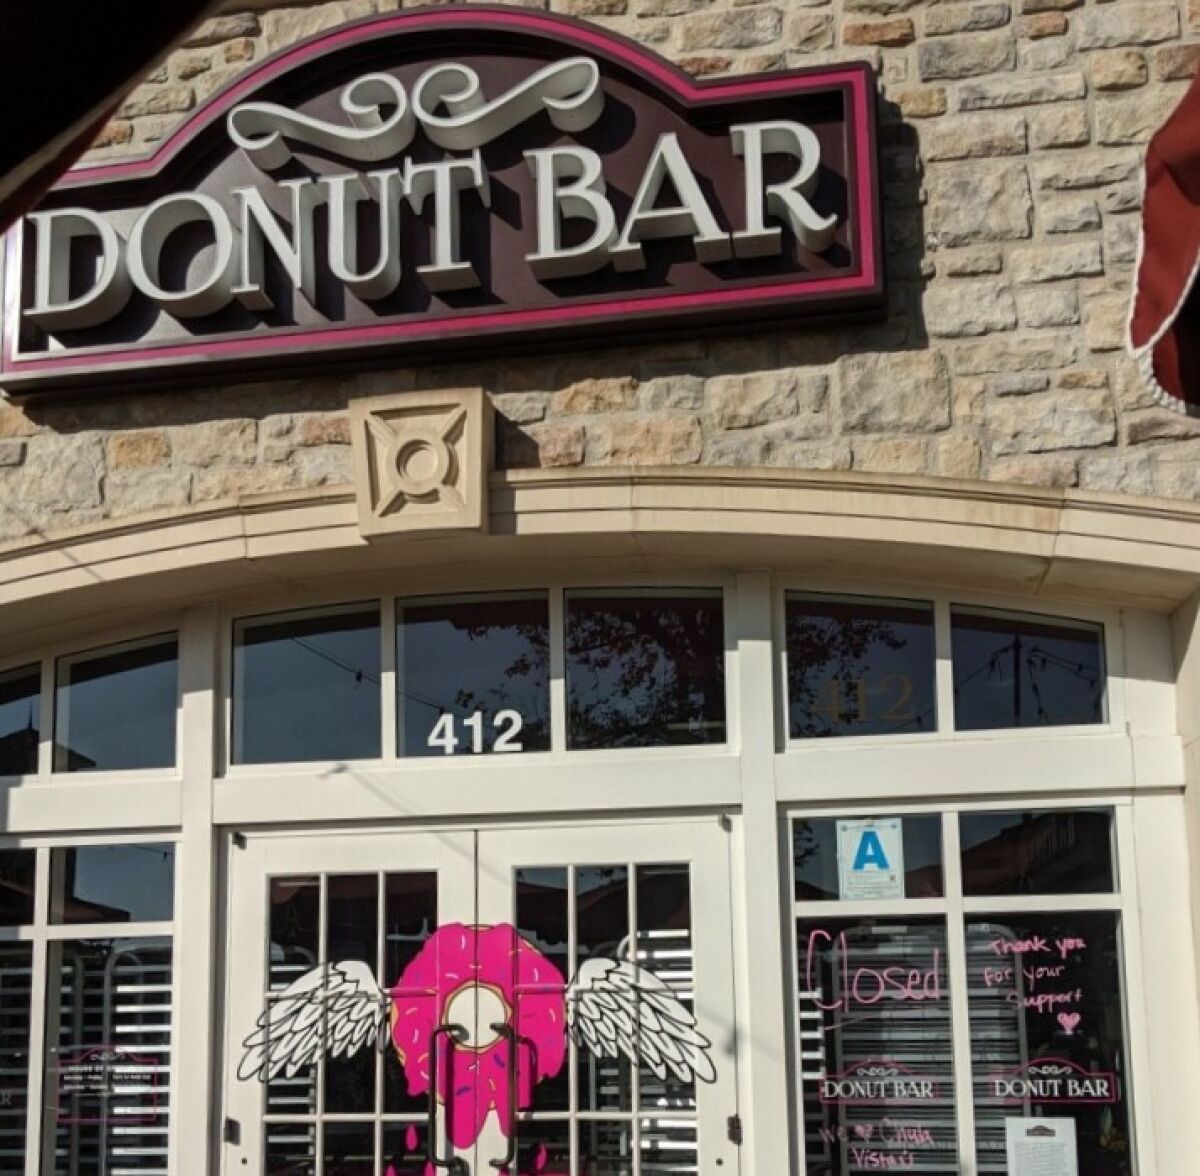 The Donut Bar that opened in Chula Vista in June abrutply closed five months later.